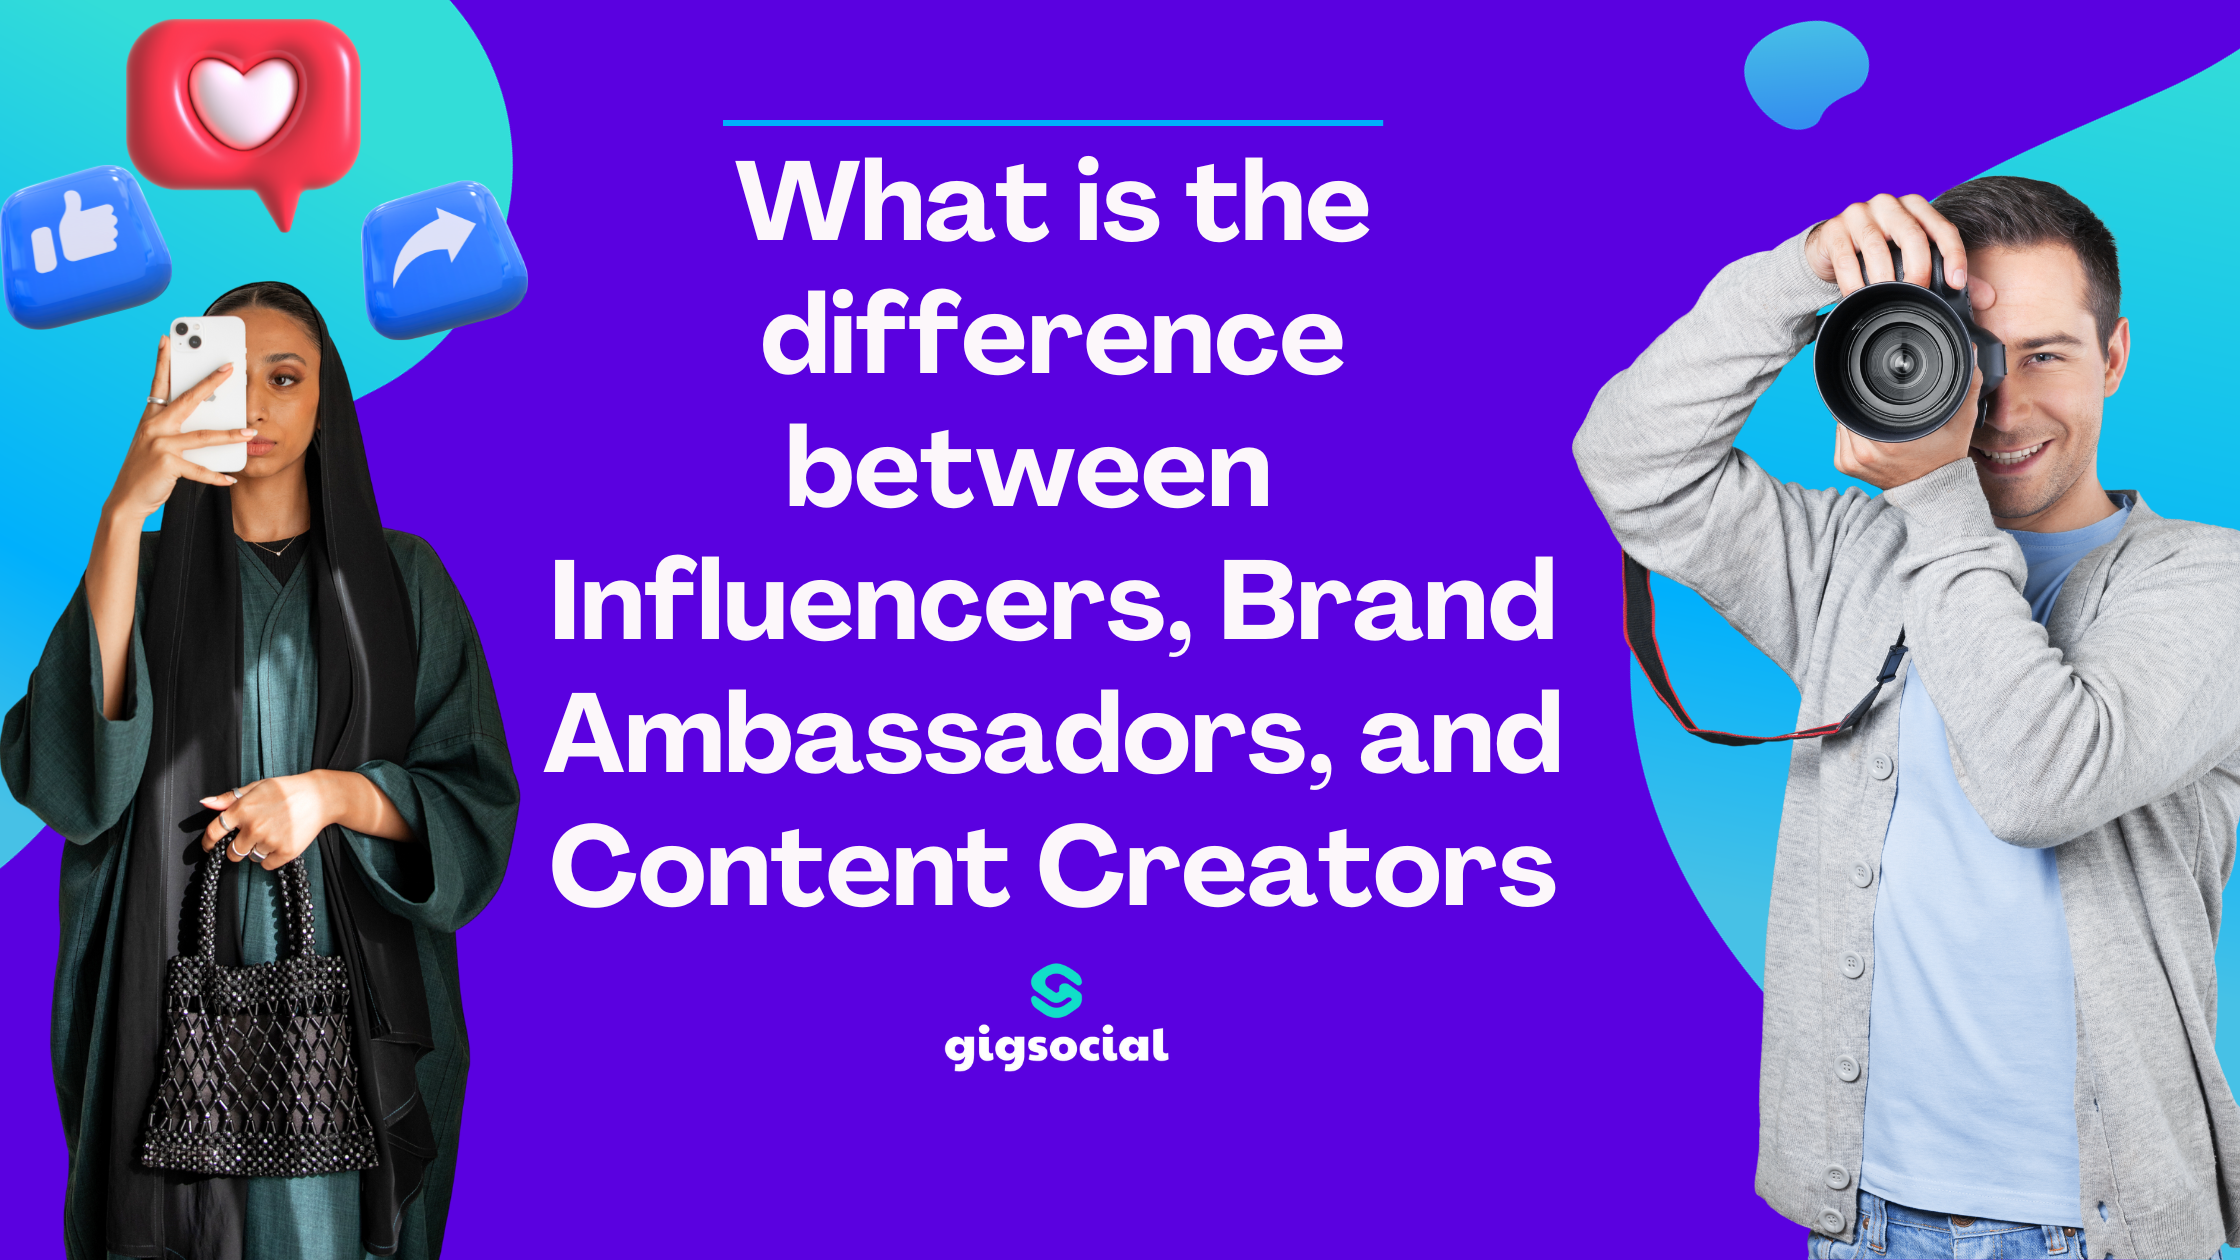 What is the difference between Influencers, Brand Ambassadors, and Content Creators